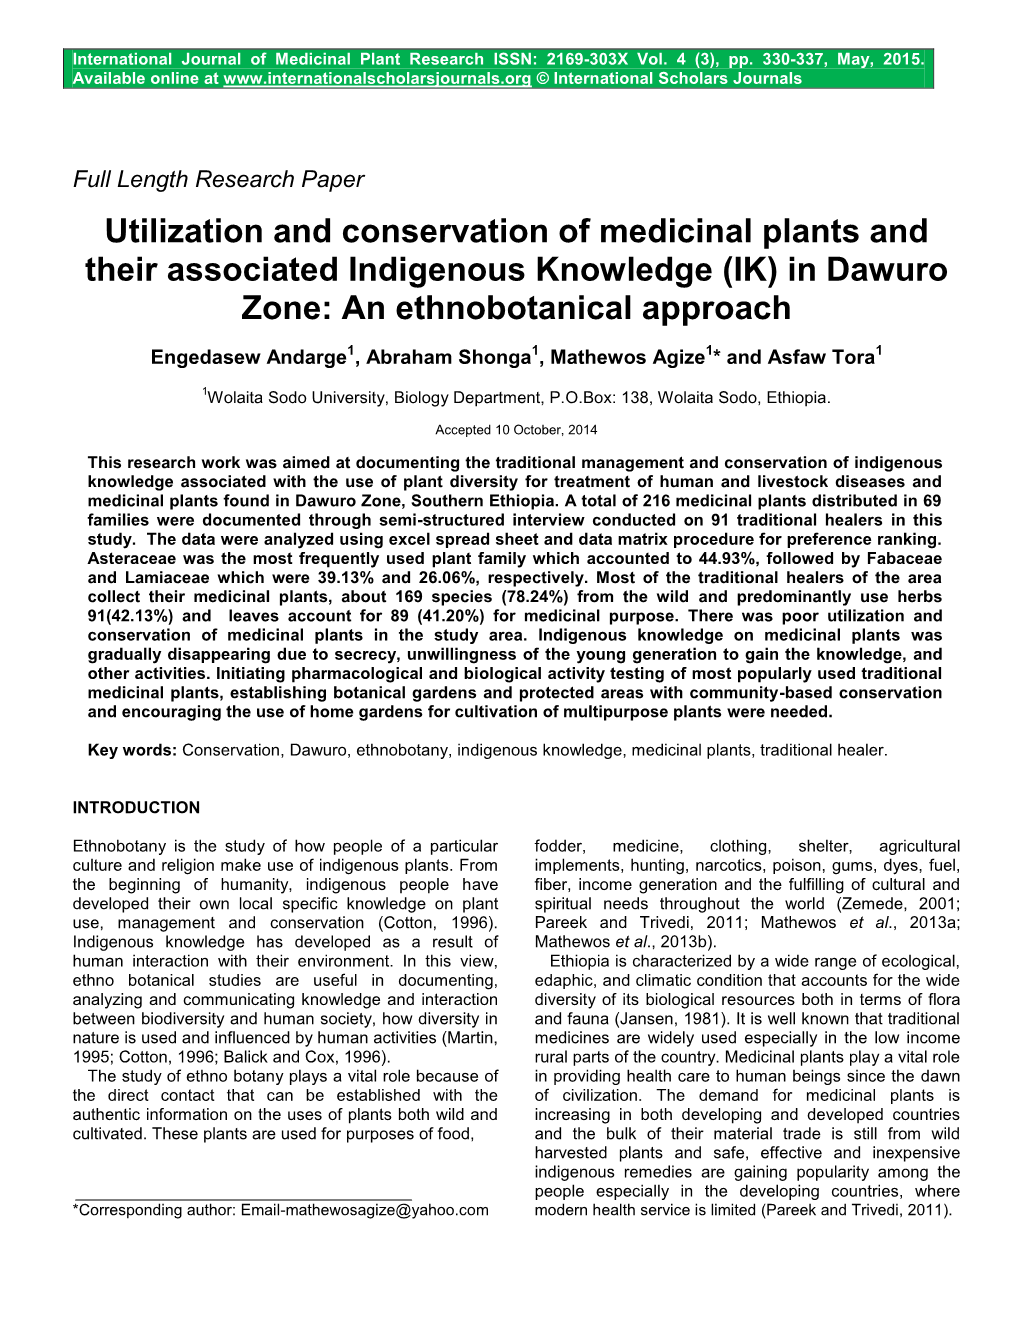 Utilization and Conservation of Medicinal Plants and Their Associated Indigenous Knowledge (IK) in Dawuro Zone: an Ethnobotanical Approach